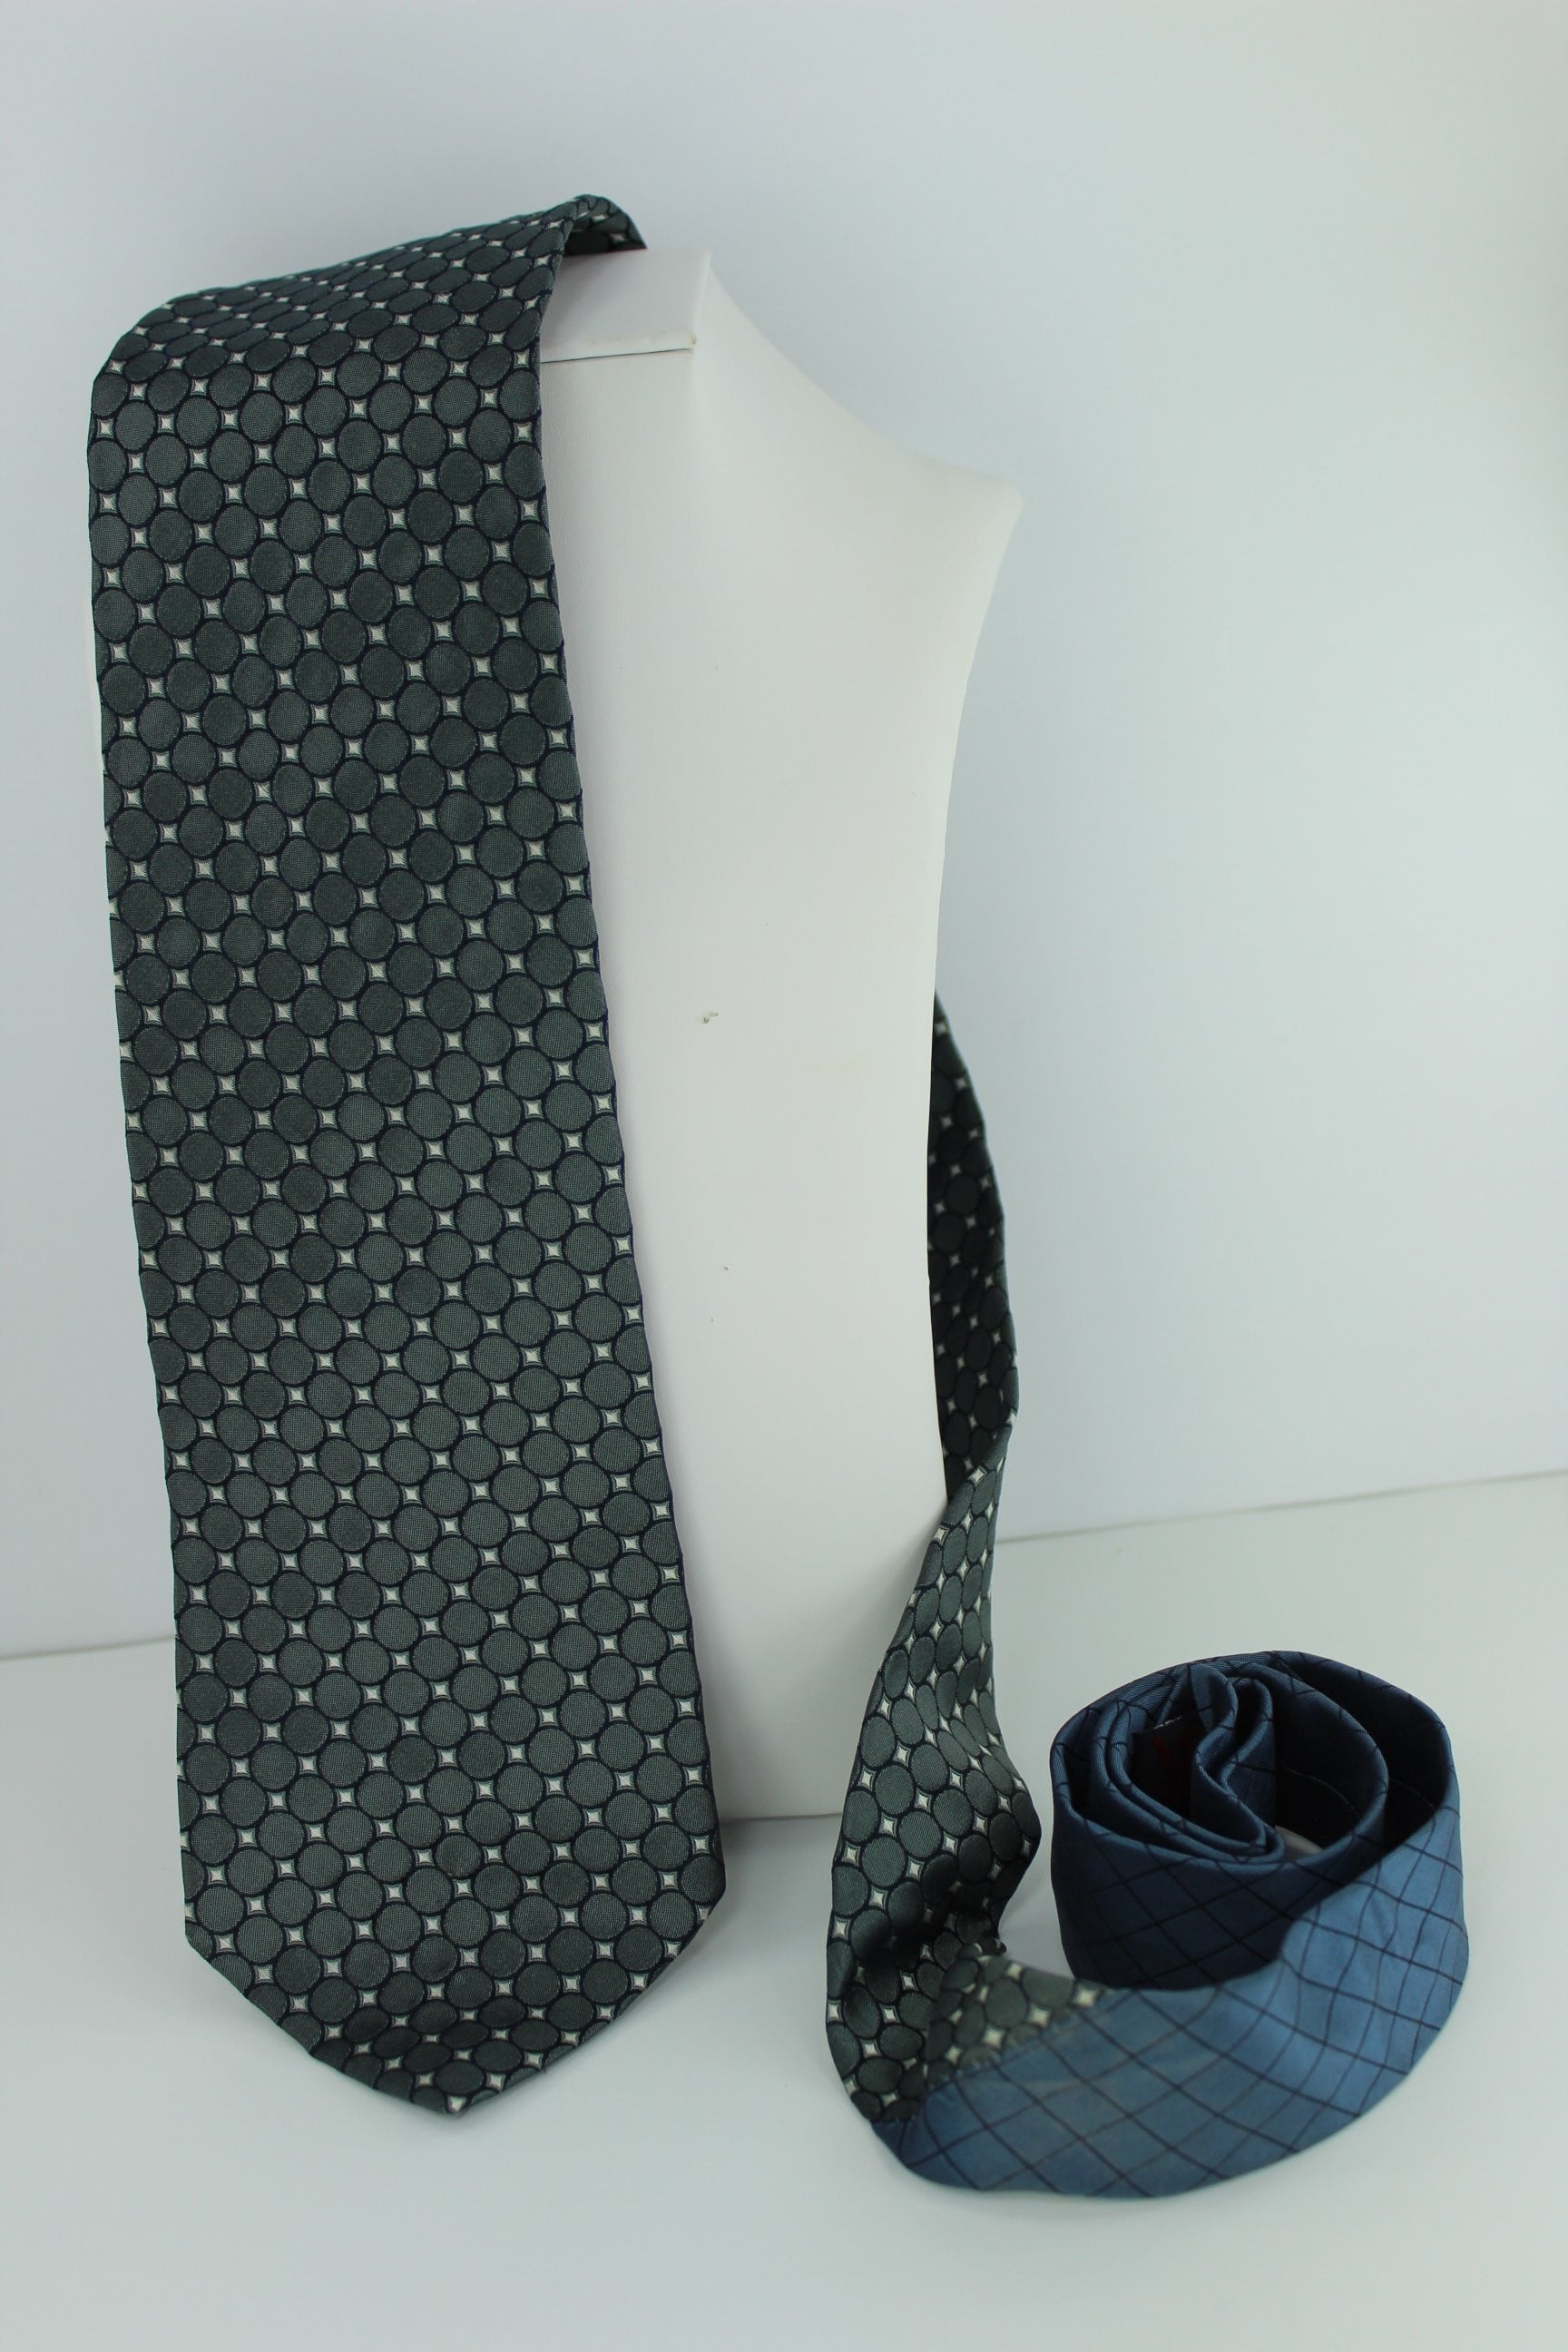 Tommy Hilfiger Unique Silk Tie USA Made - Charcoal Ovals Elegance exceptional tie